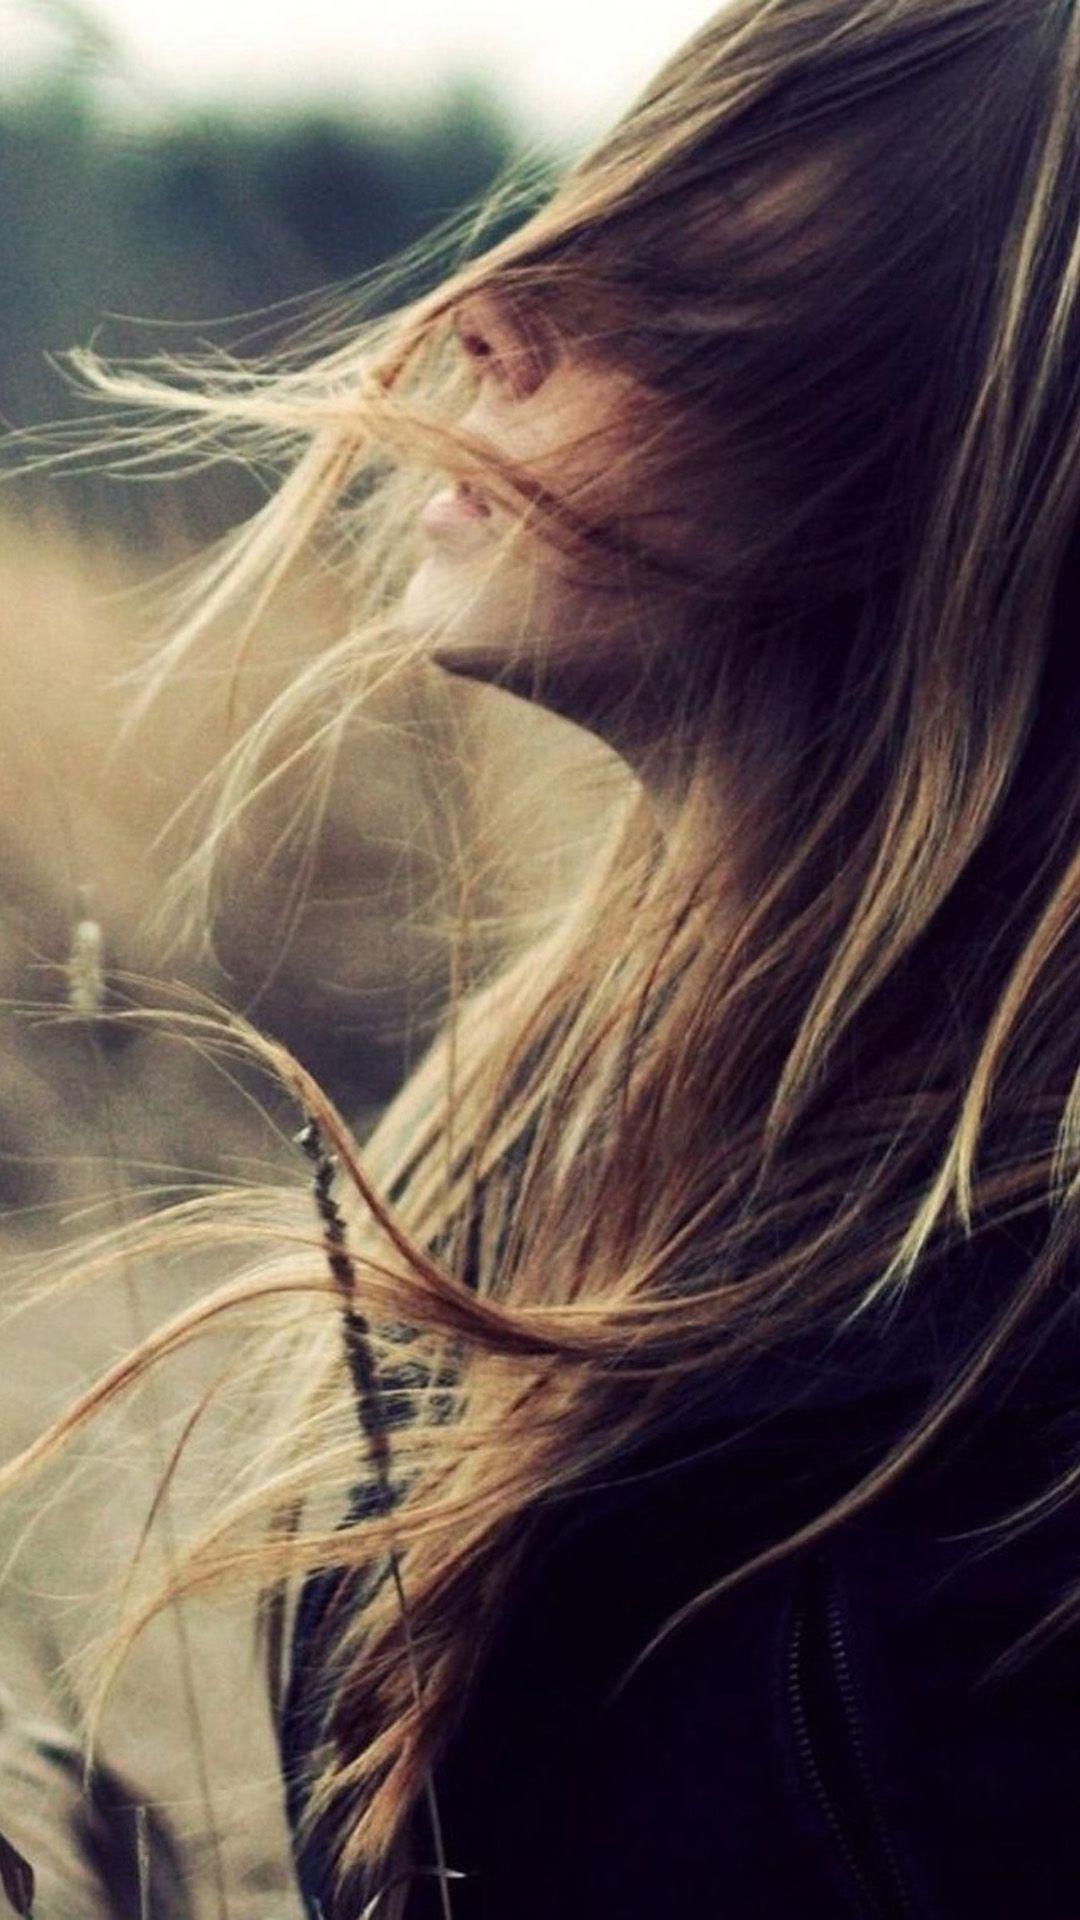 Beautiful Girl Face Flying Hair IPhone 6 Wallpaper Download. IPhone Wallpaper, IPad Wallpaper One Stop Down. Hair In The Wind, Nature Girl, Beautiful Girl Face